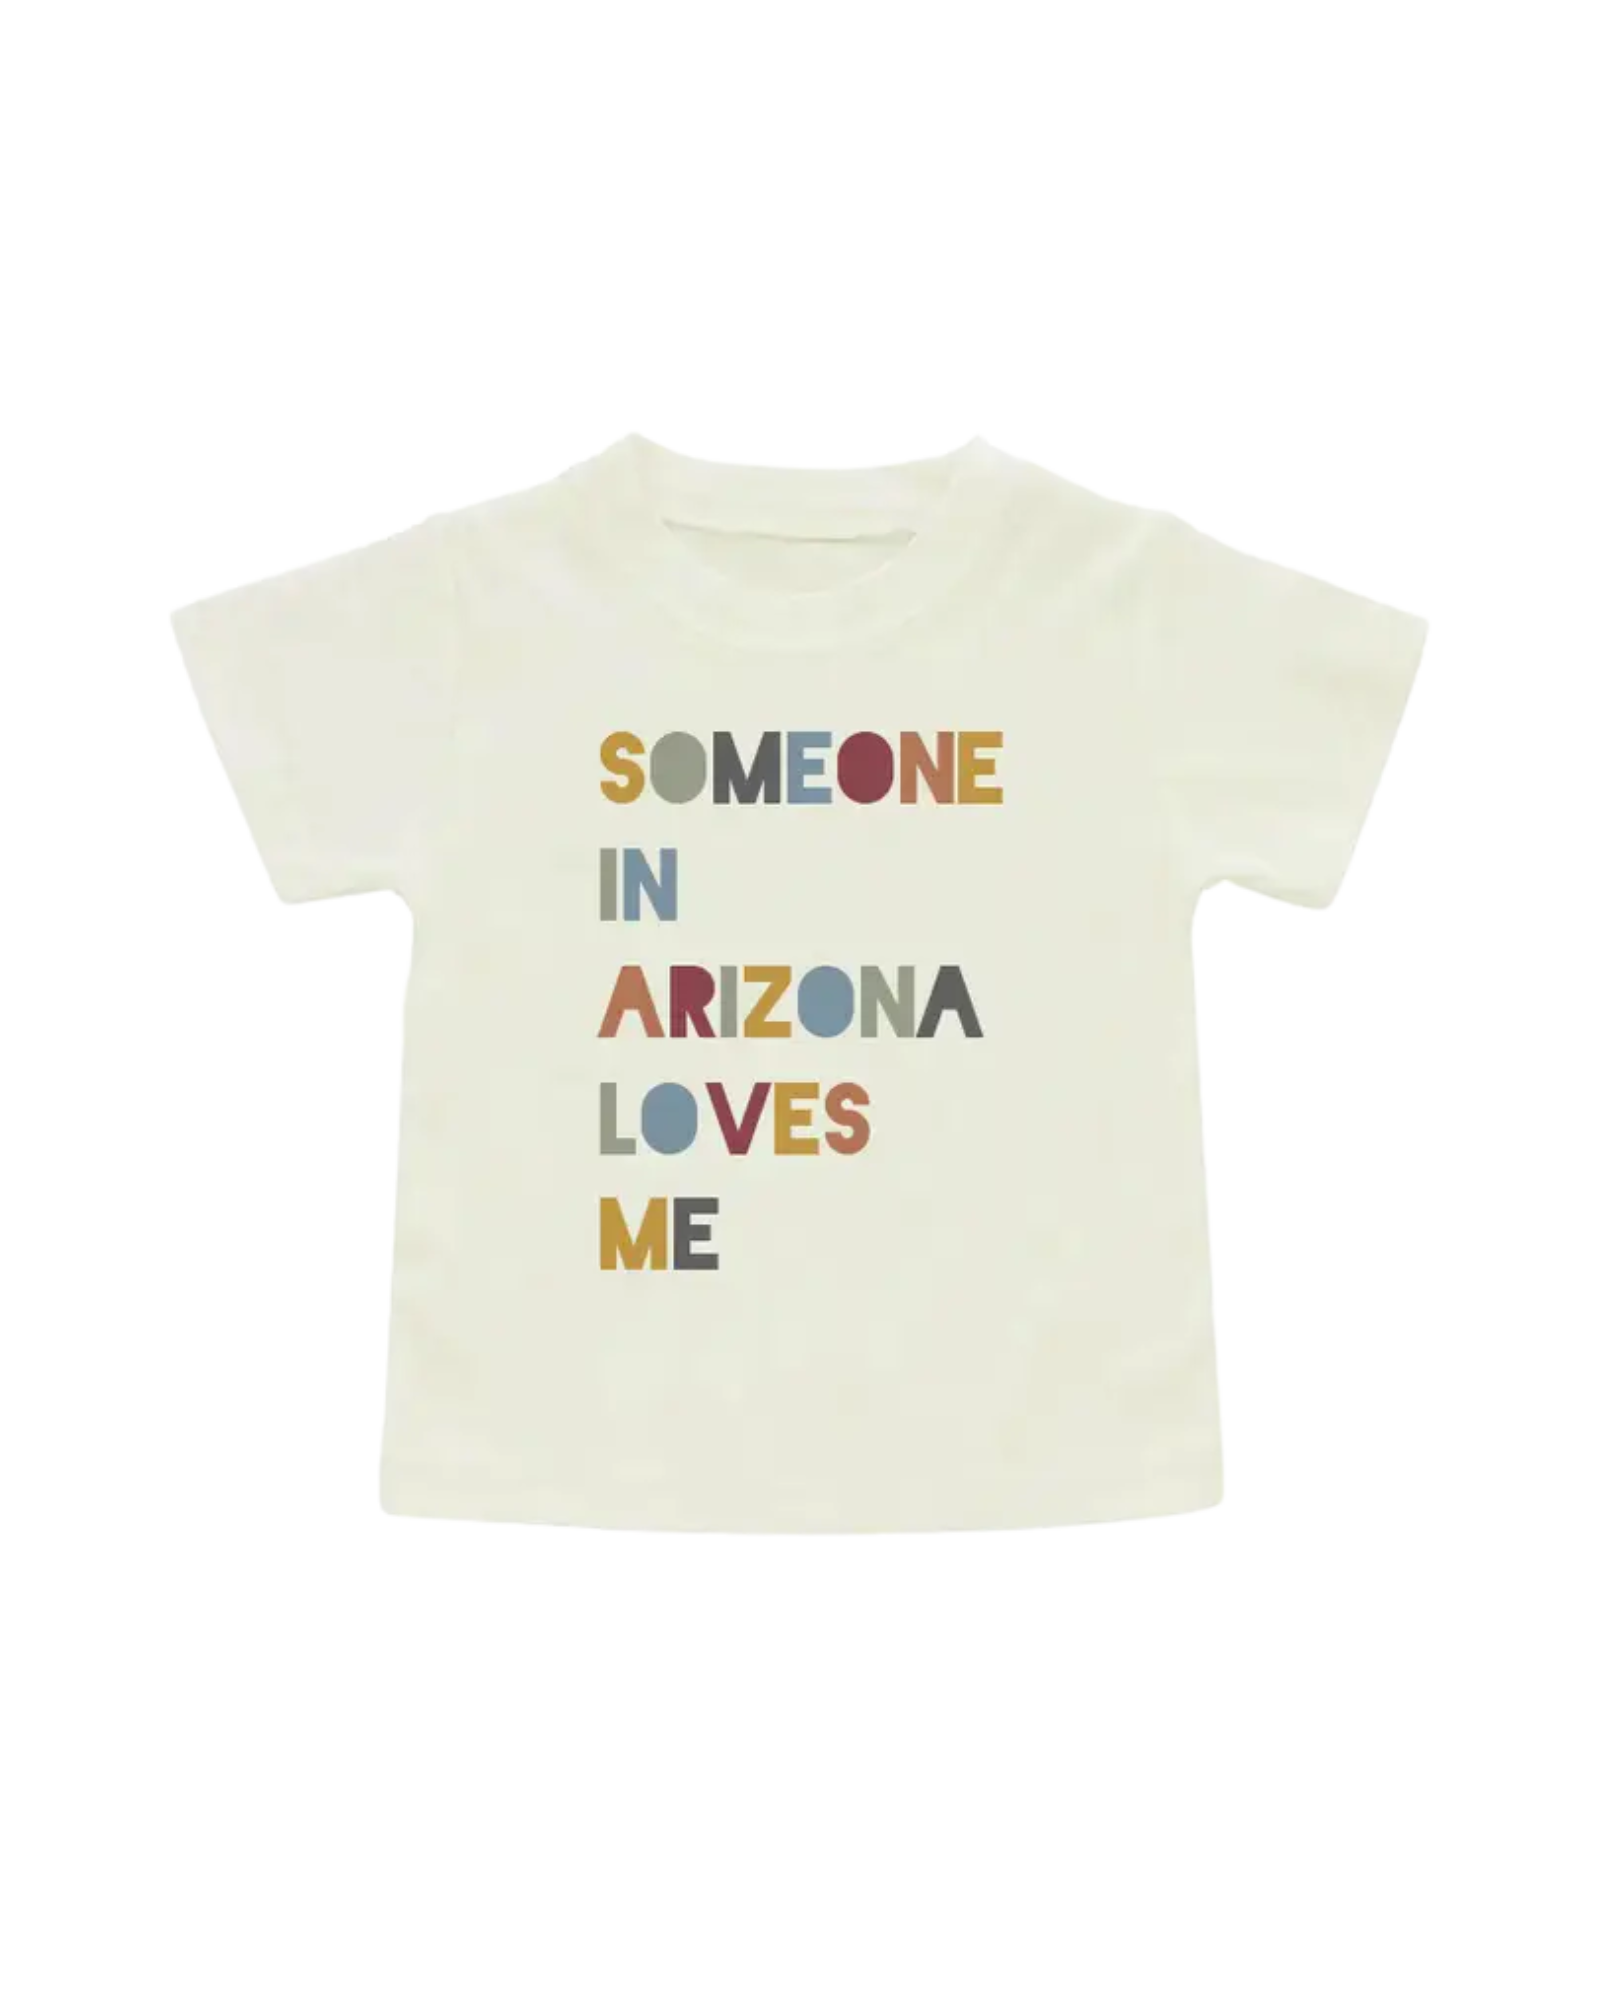 Cream toddler shirt with the words "someone in arizona loves me" 